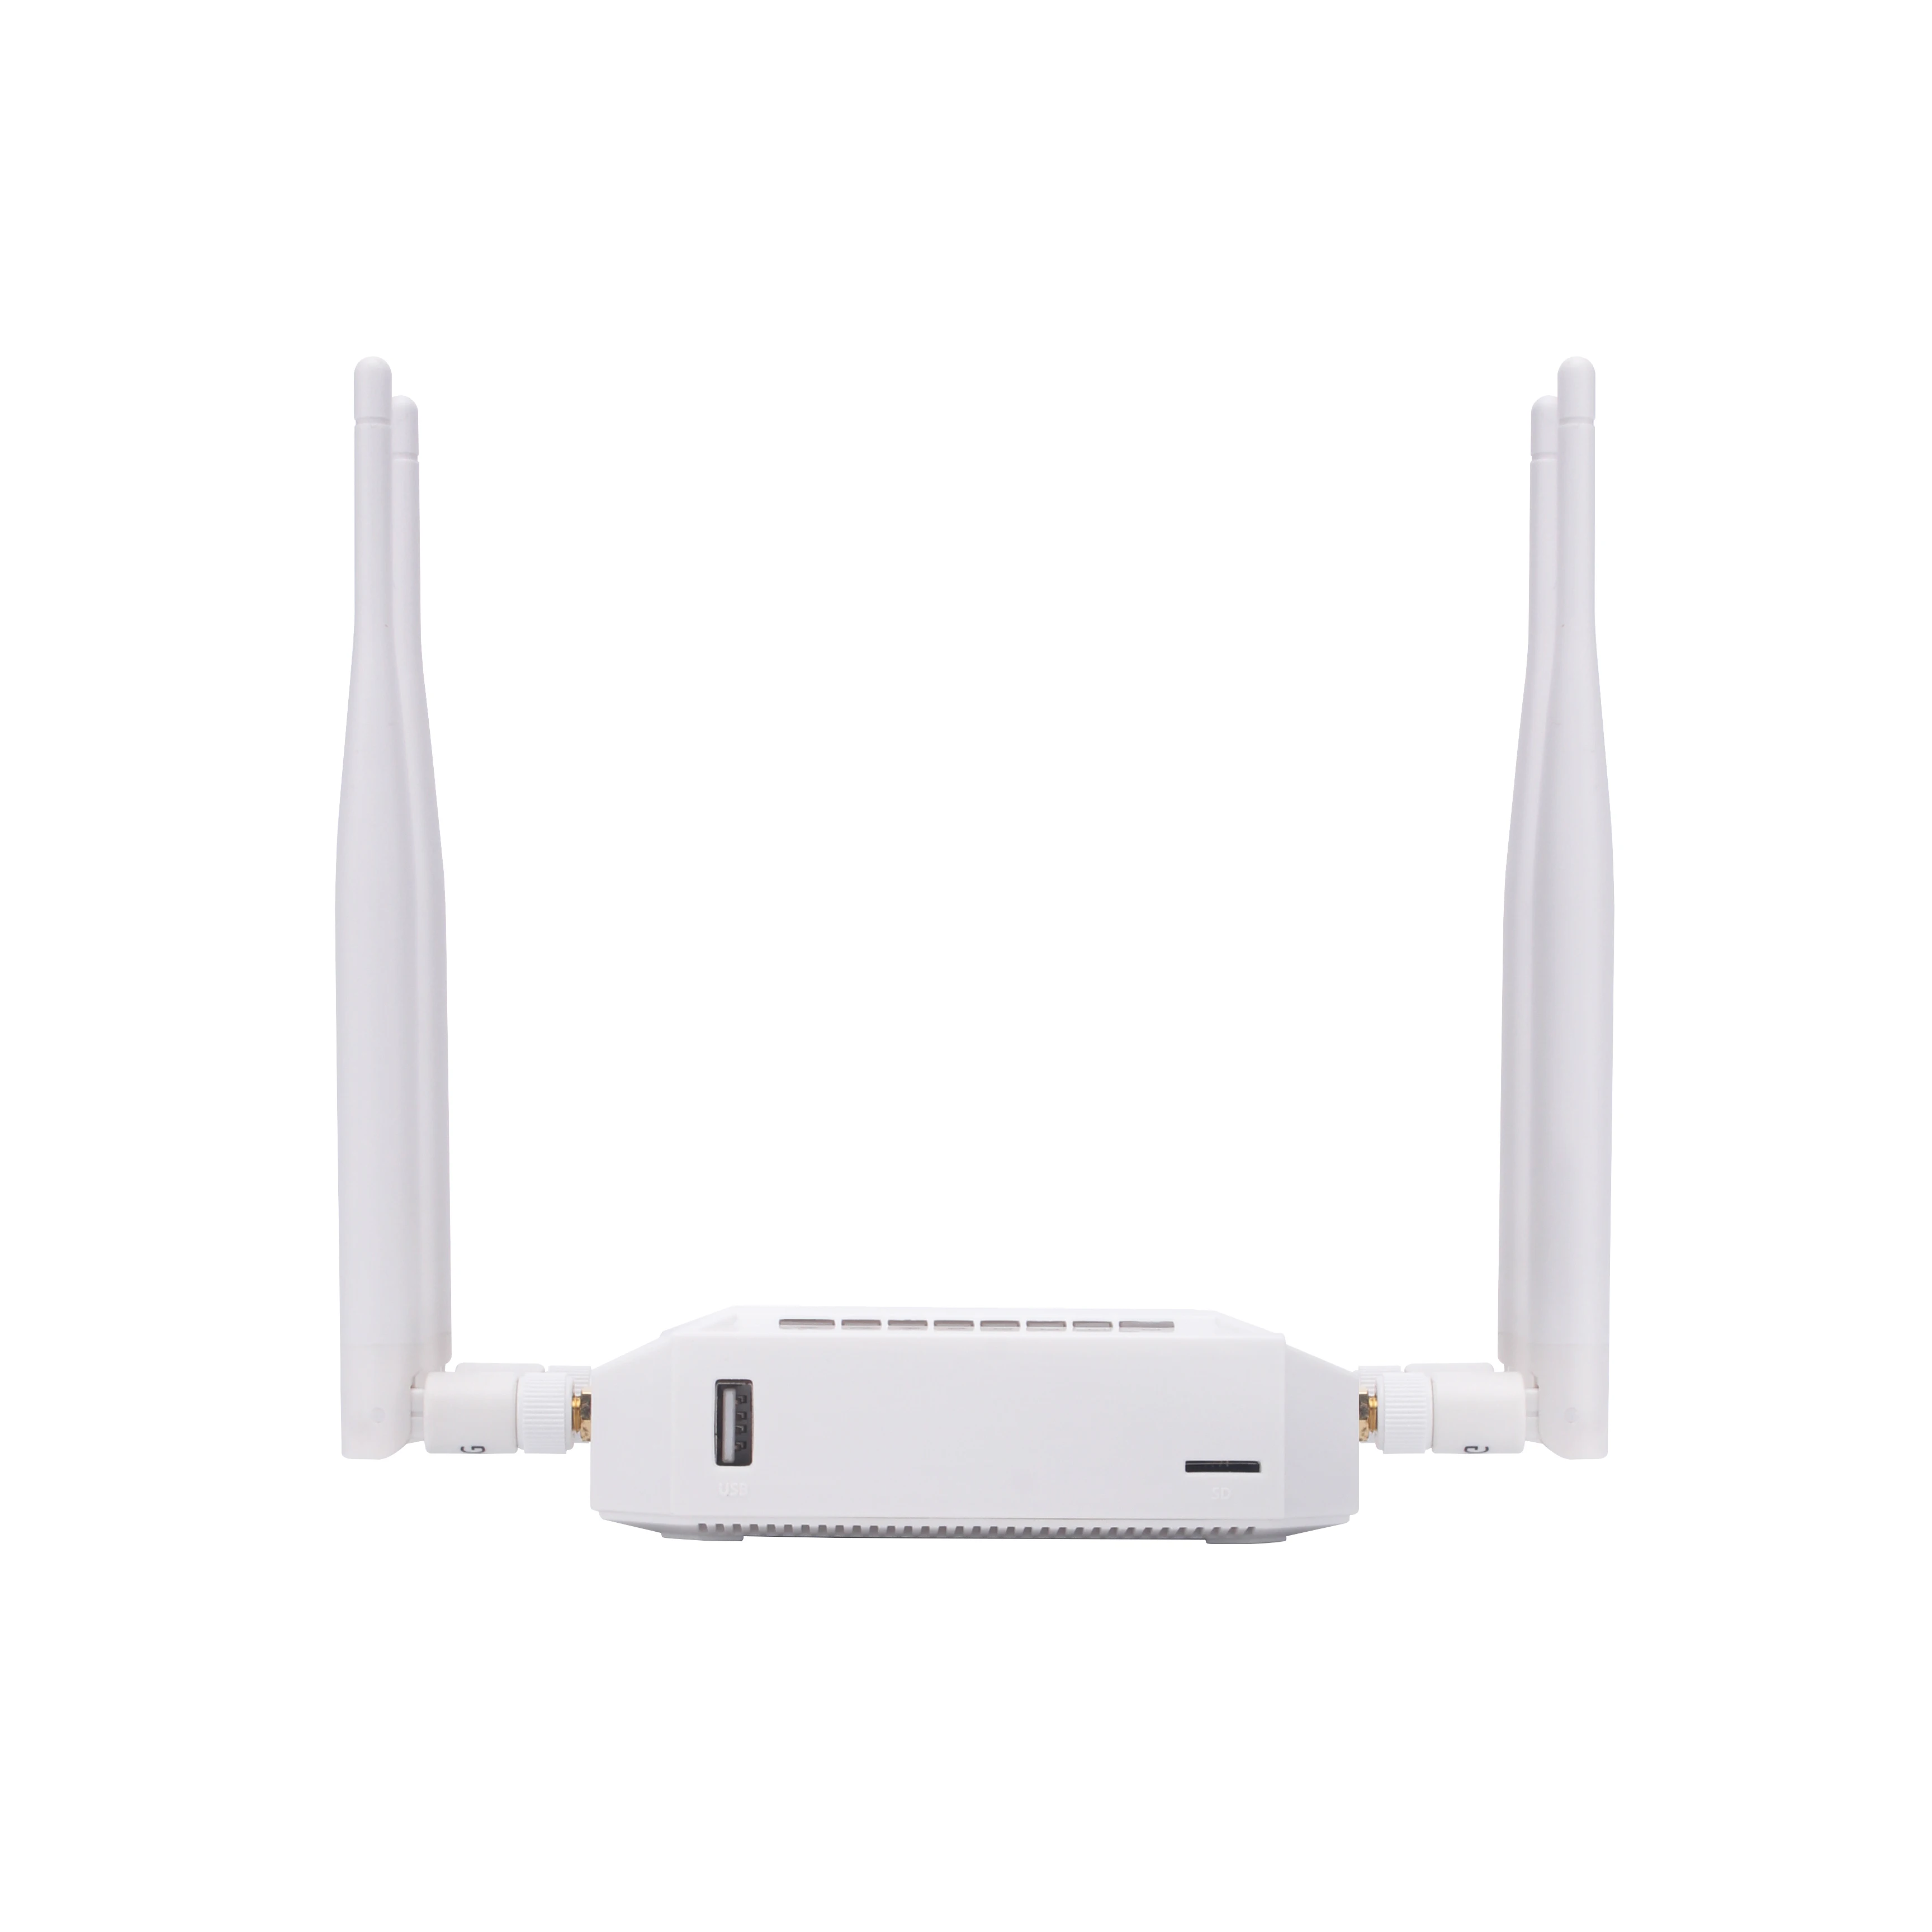 

Kuwfi 3G/4G SIM Card Slot Wifi Router OpenWrt 300Mbps High Power Wireless Router Repeater with VPN Function and 4*5dBi Antenna